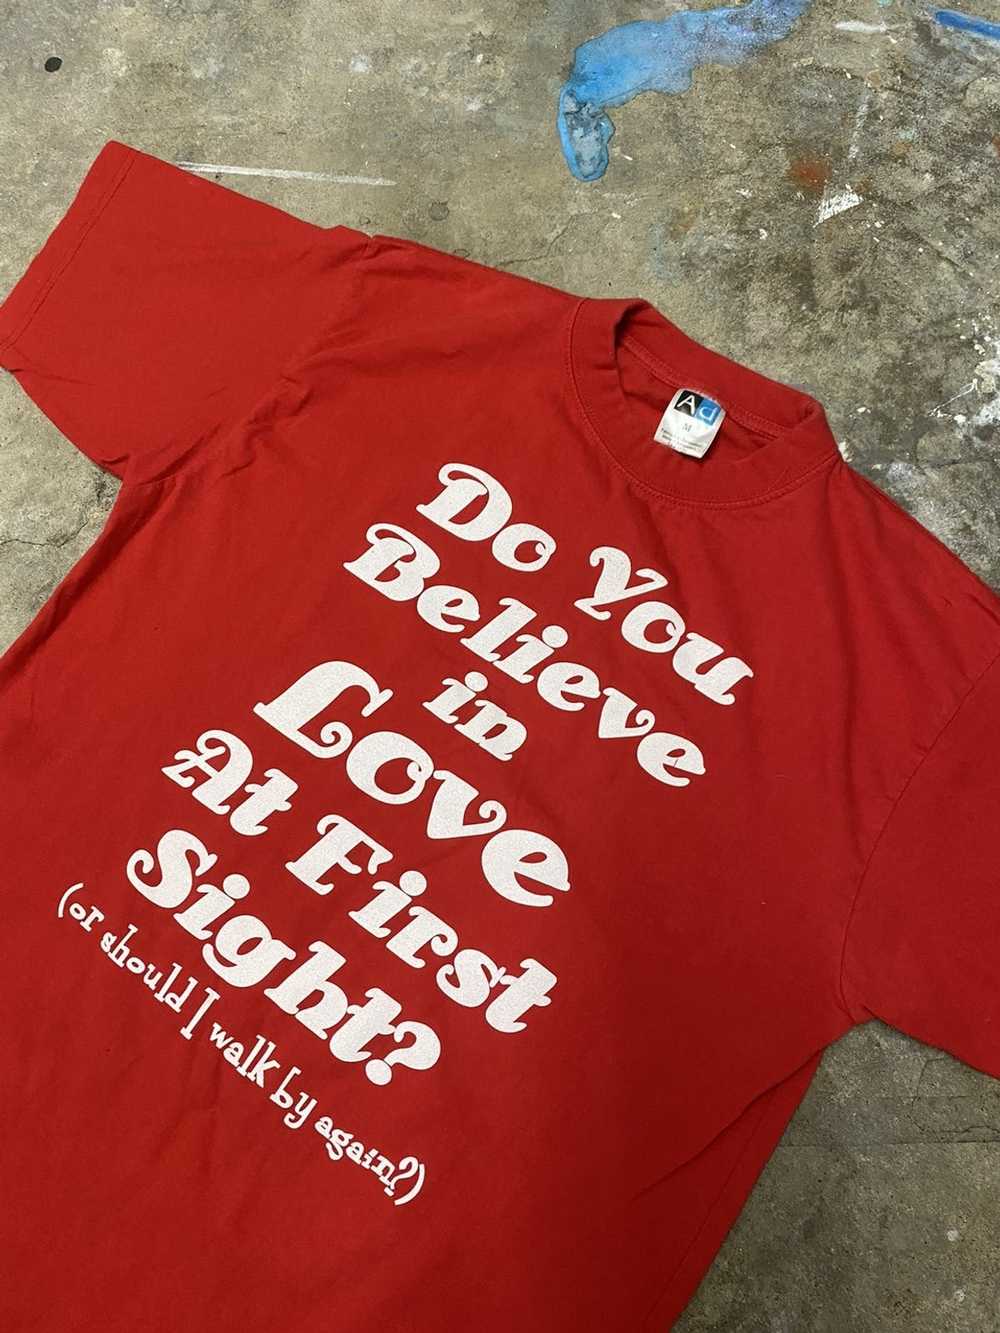 Streetwear × Vintage Love at First Sight Tee - image 2